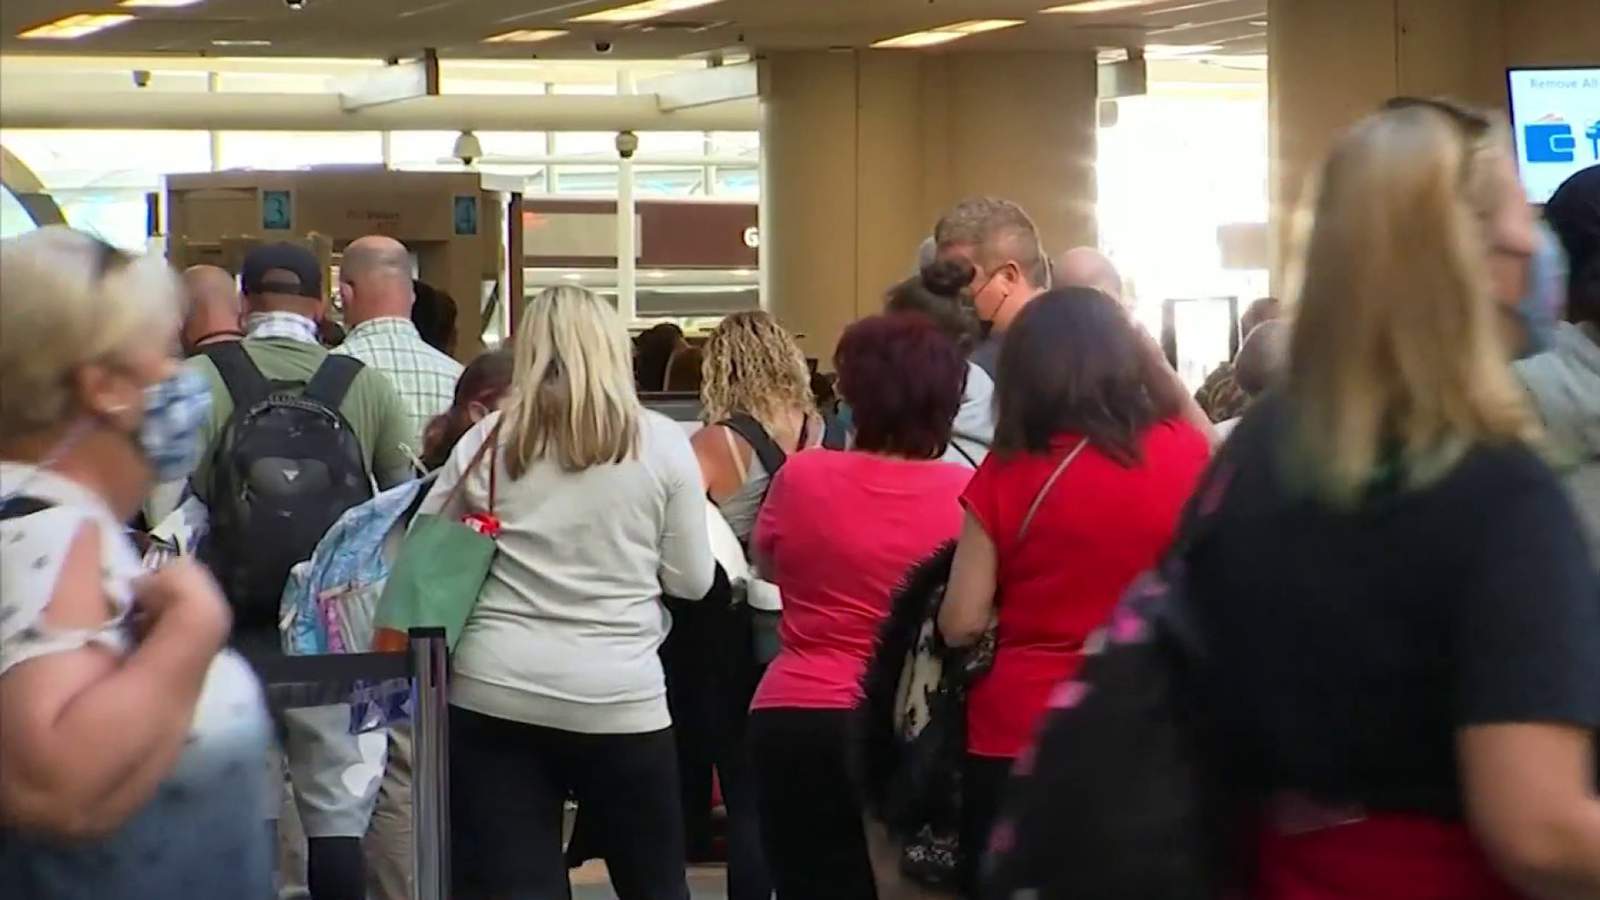 More than 1 million screened for 6th straight day, TSA says